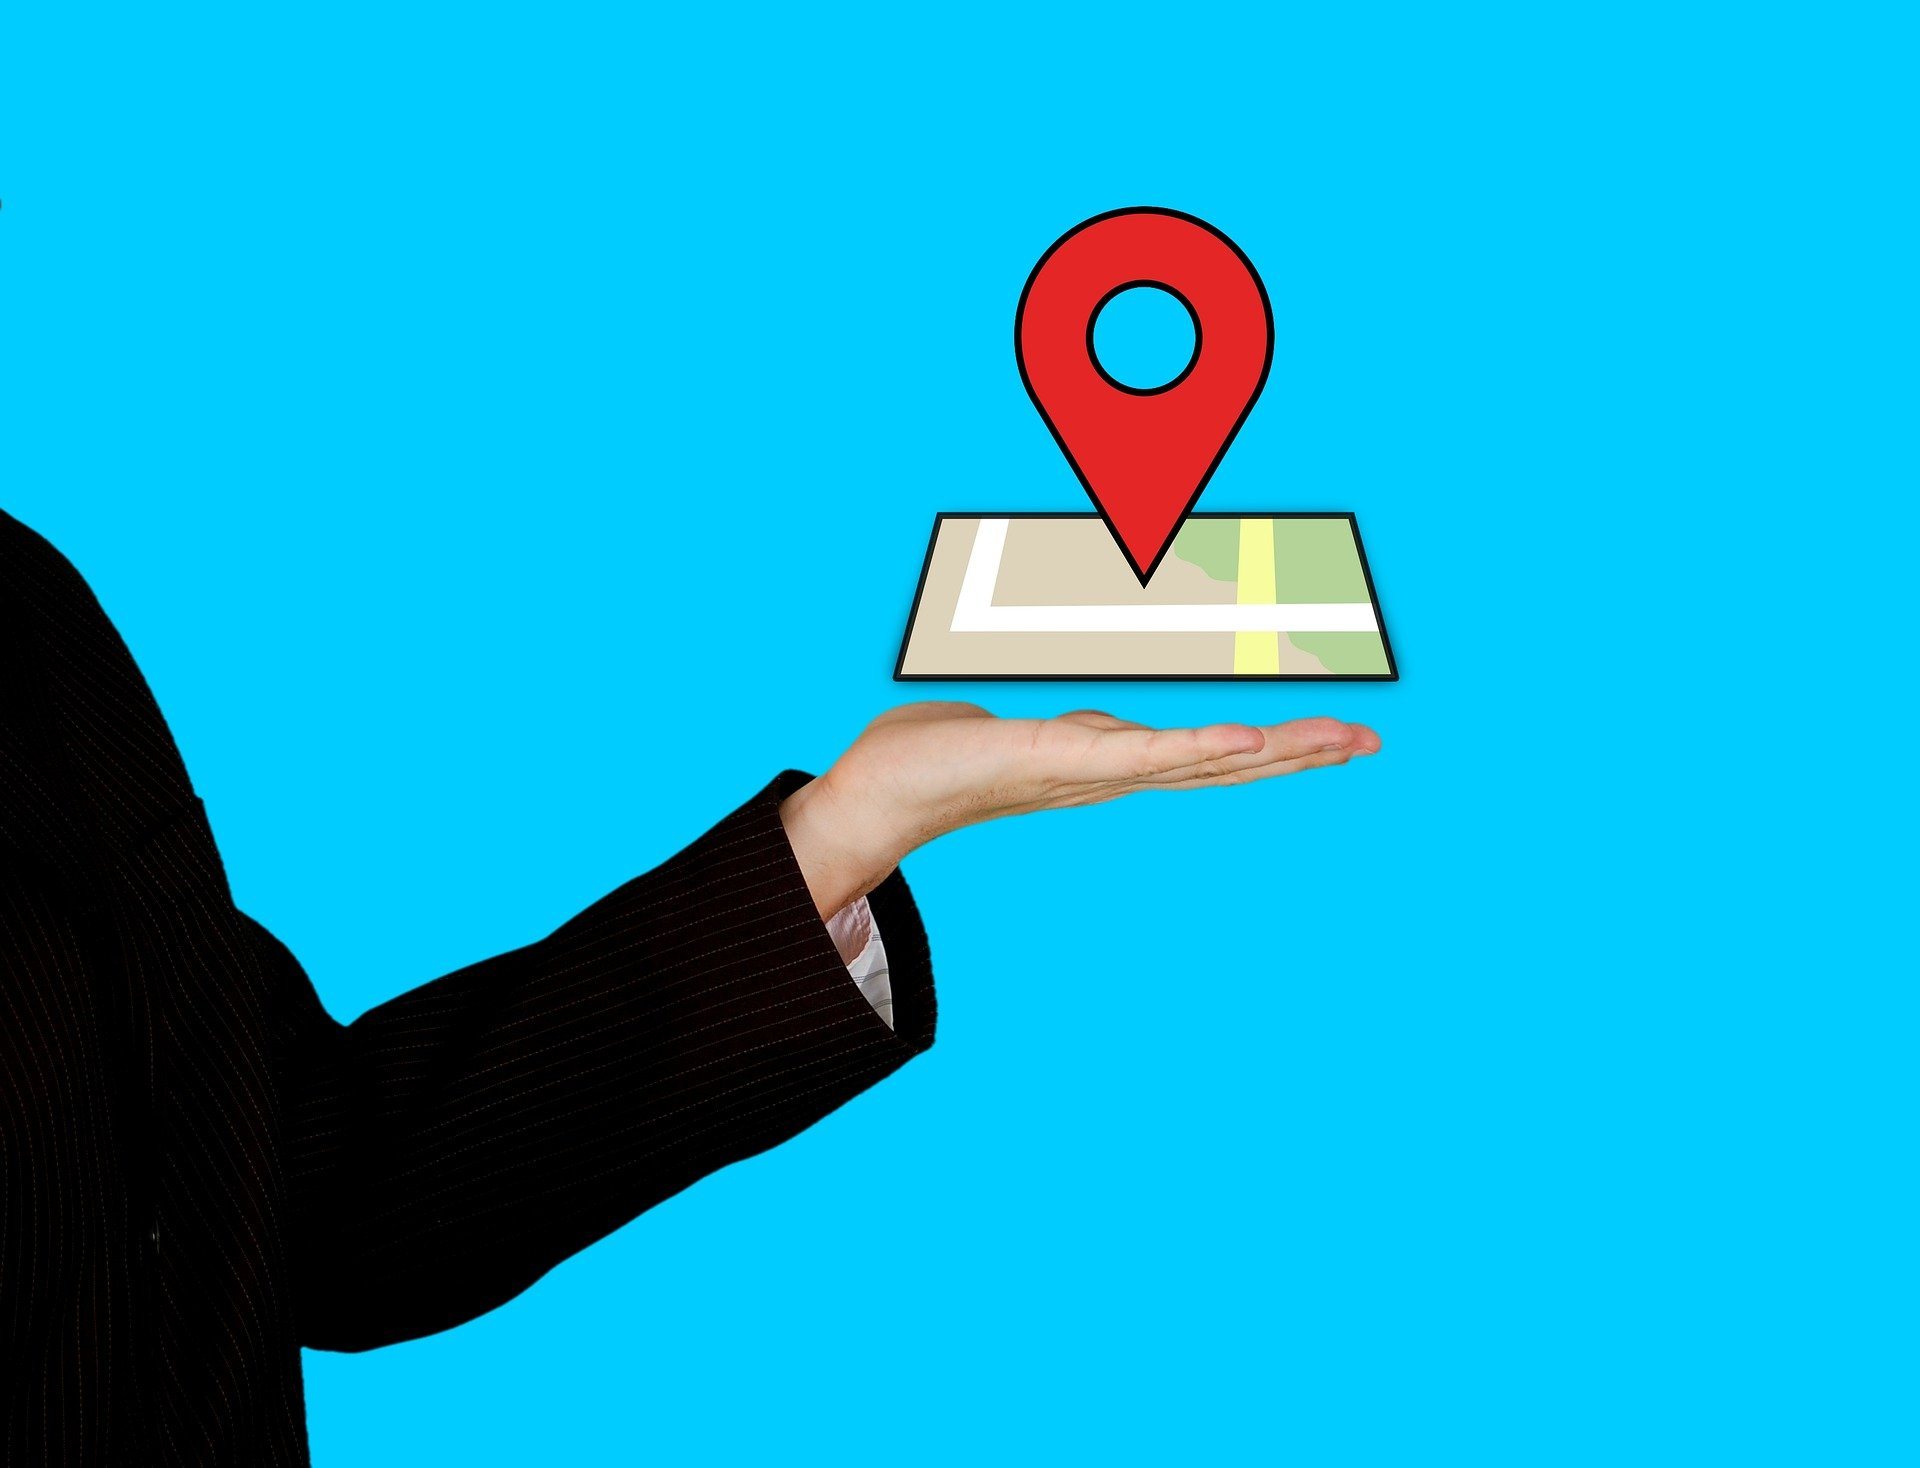 How to improve local search results